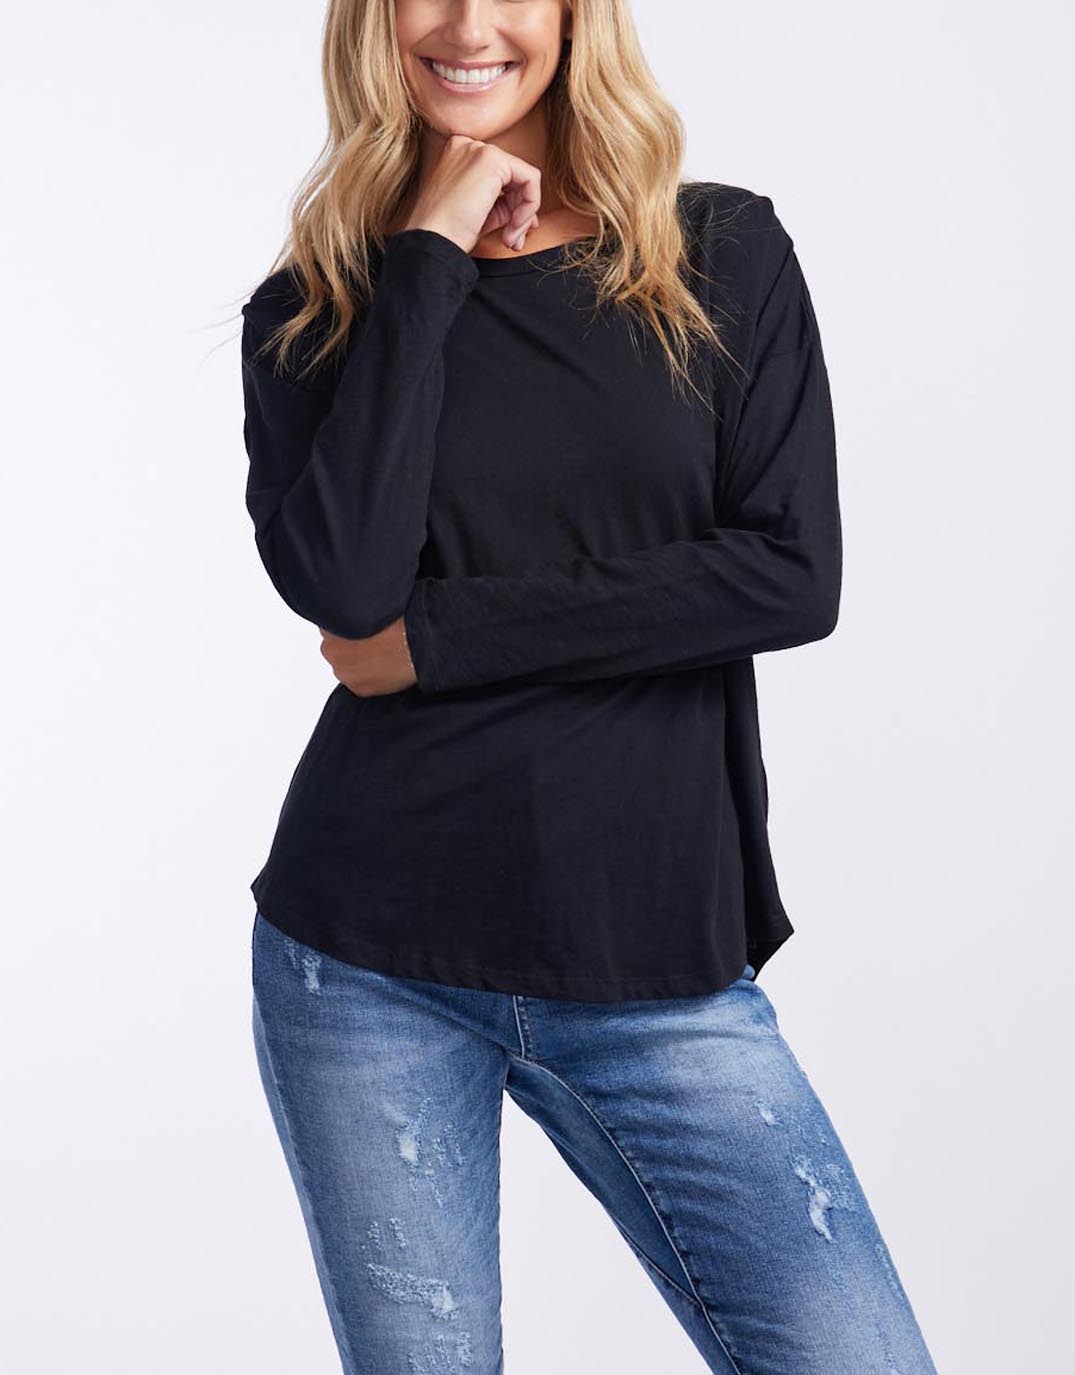 white-co-original-relaxed-long-sleeve-tee-black-womens-clothing